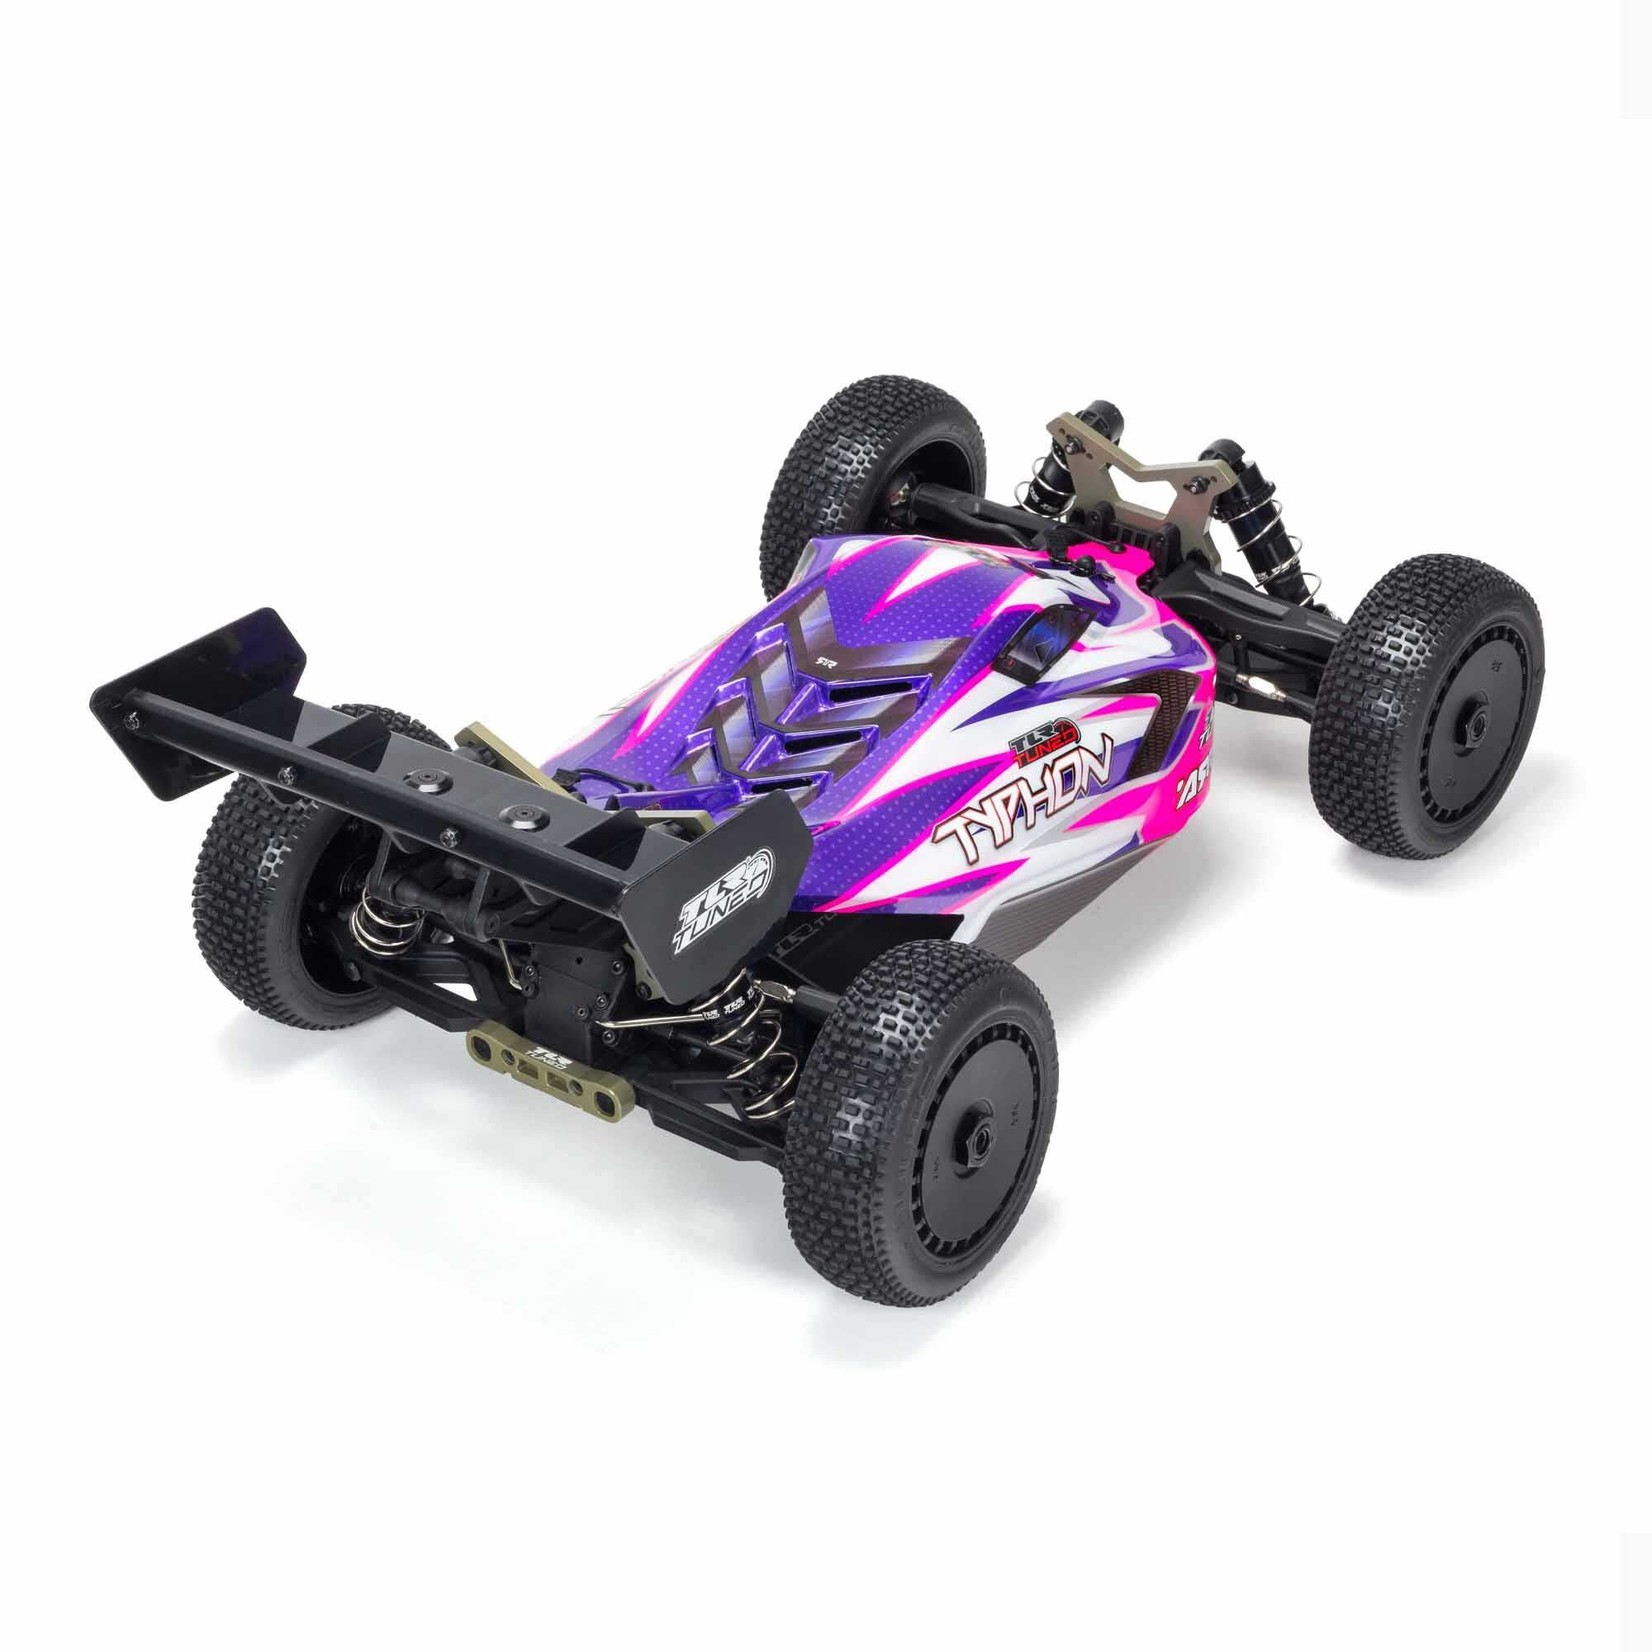 Arrma 1/8 TLR Tuned TYPHON 4WD Roller Buggy, Pink/Purple